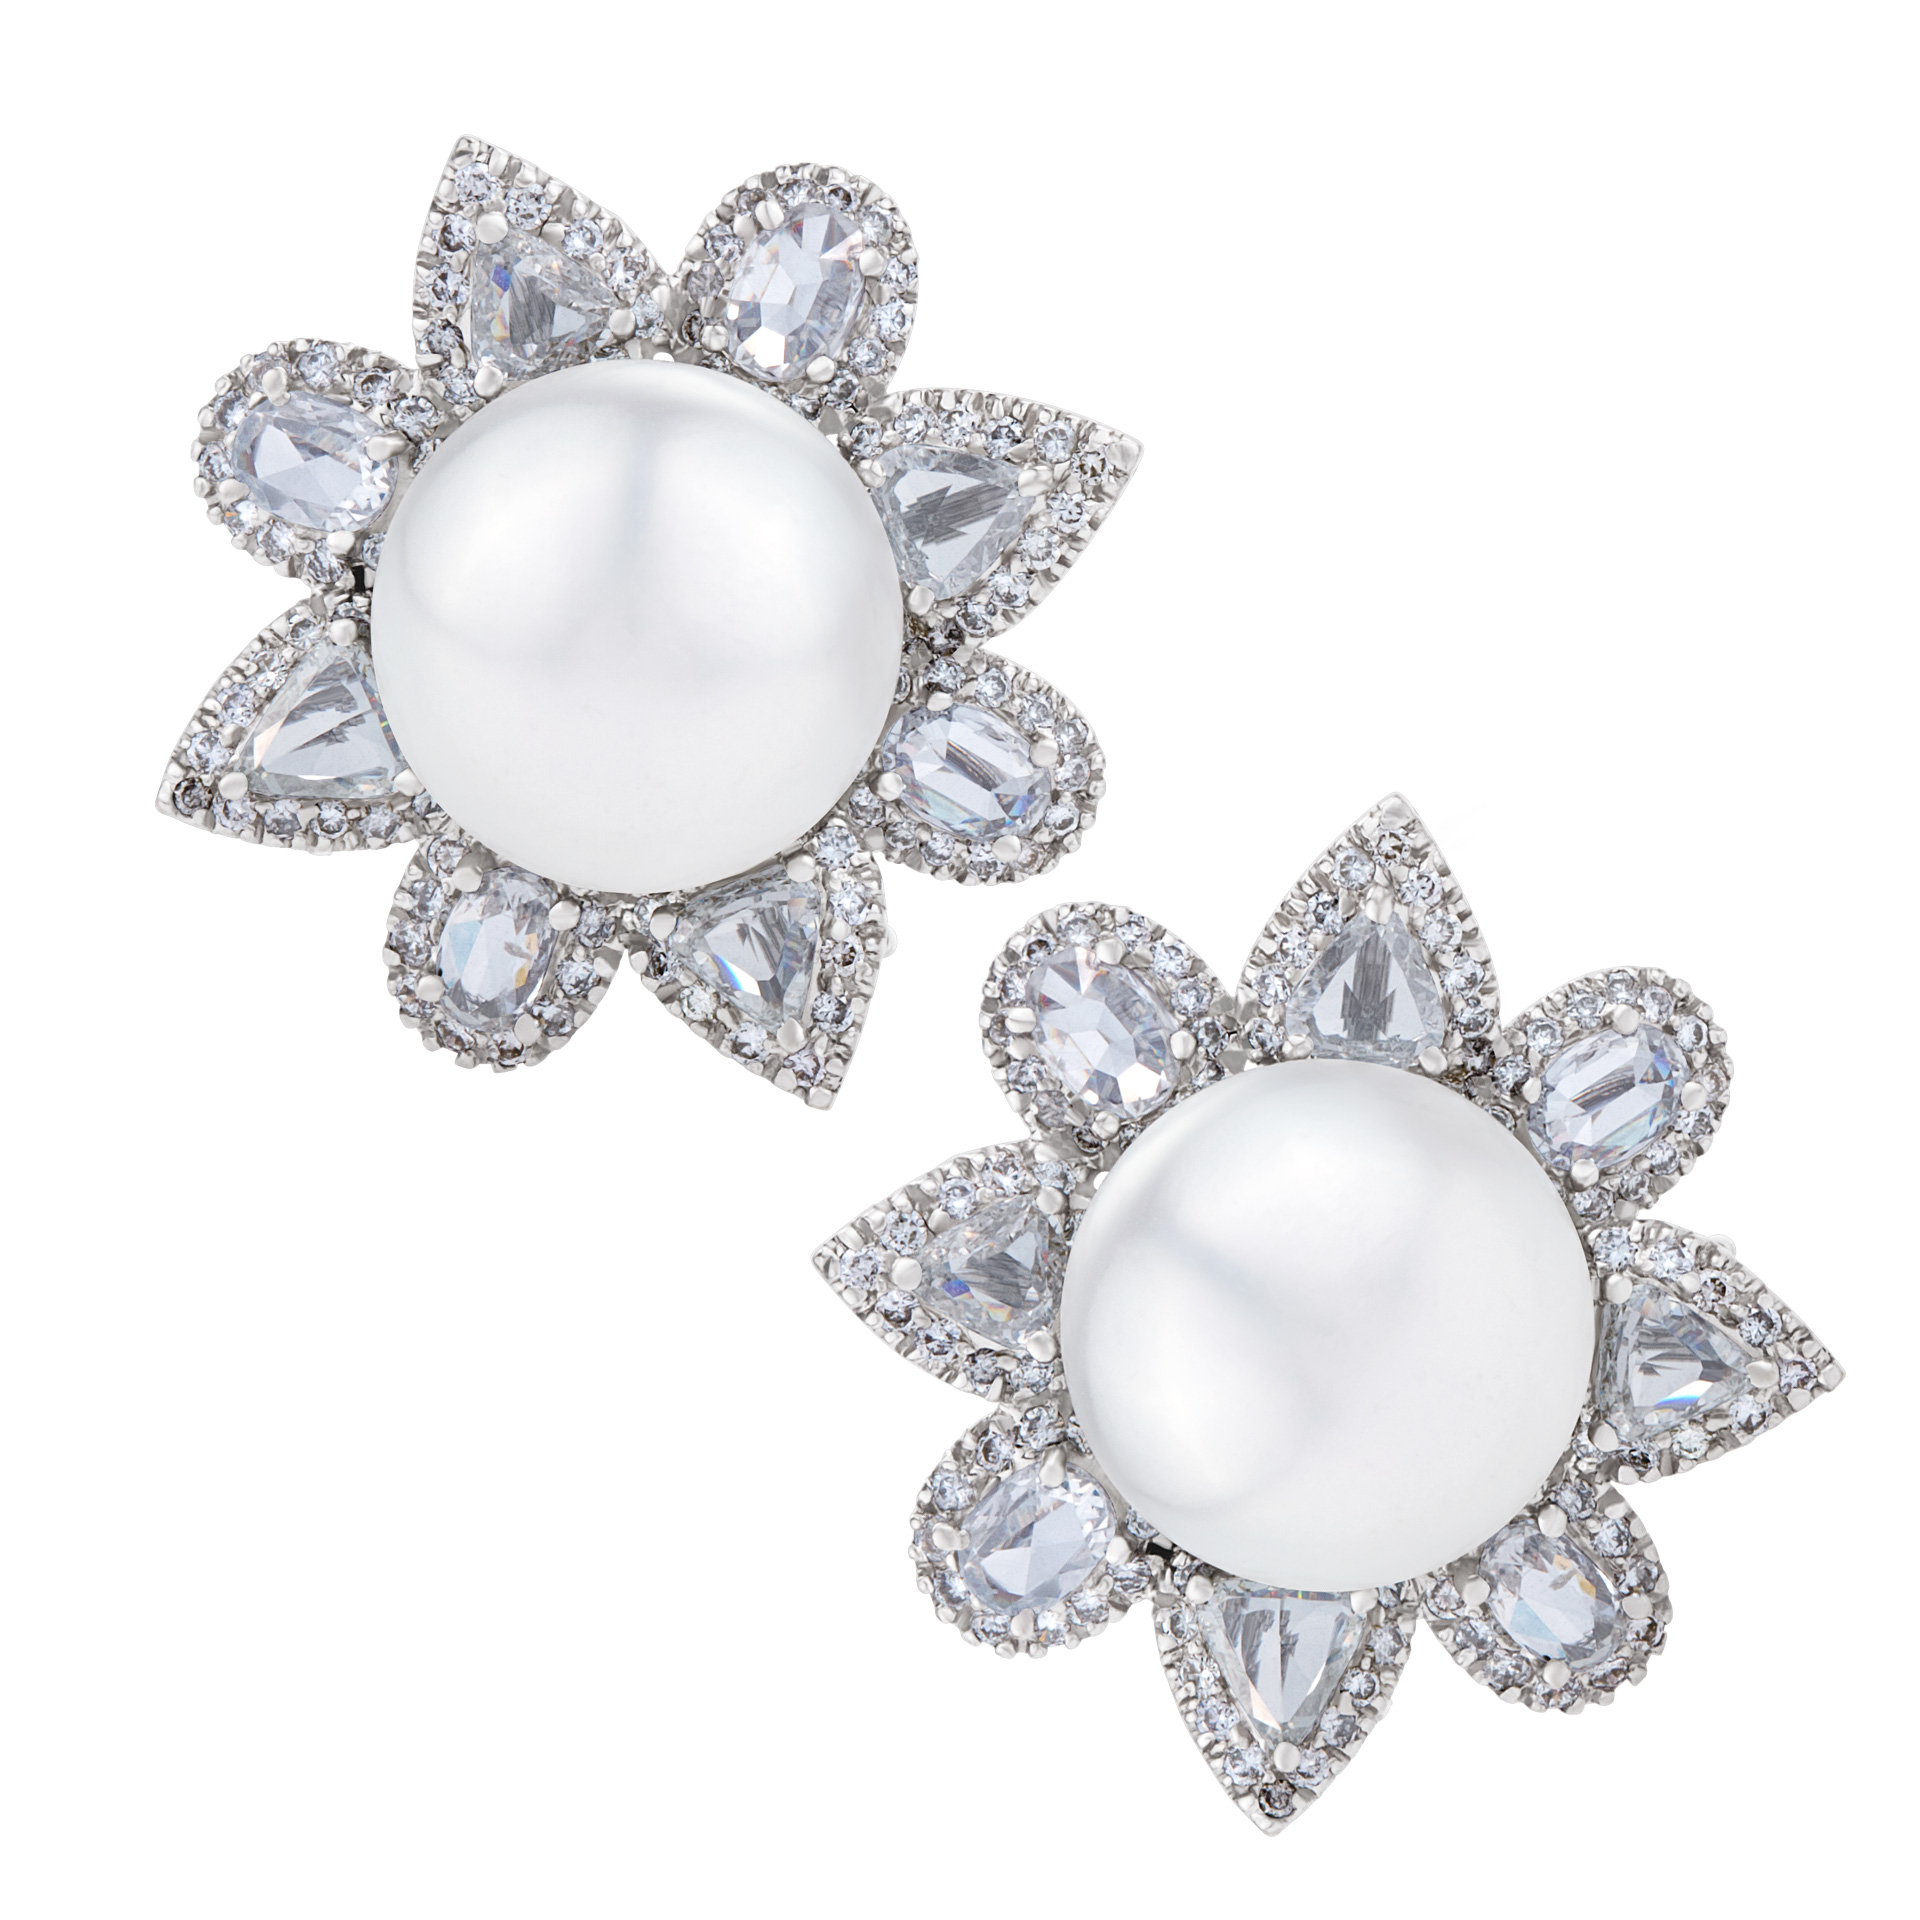 South sea pearl and diamond earrings set in 18k white gold